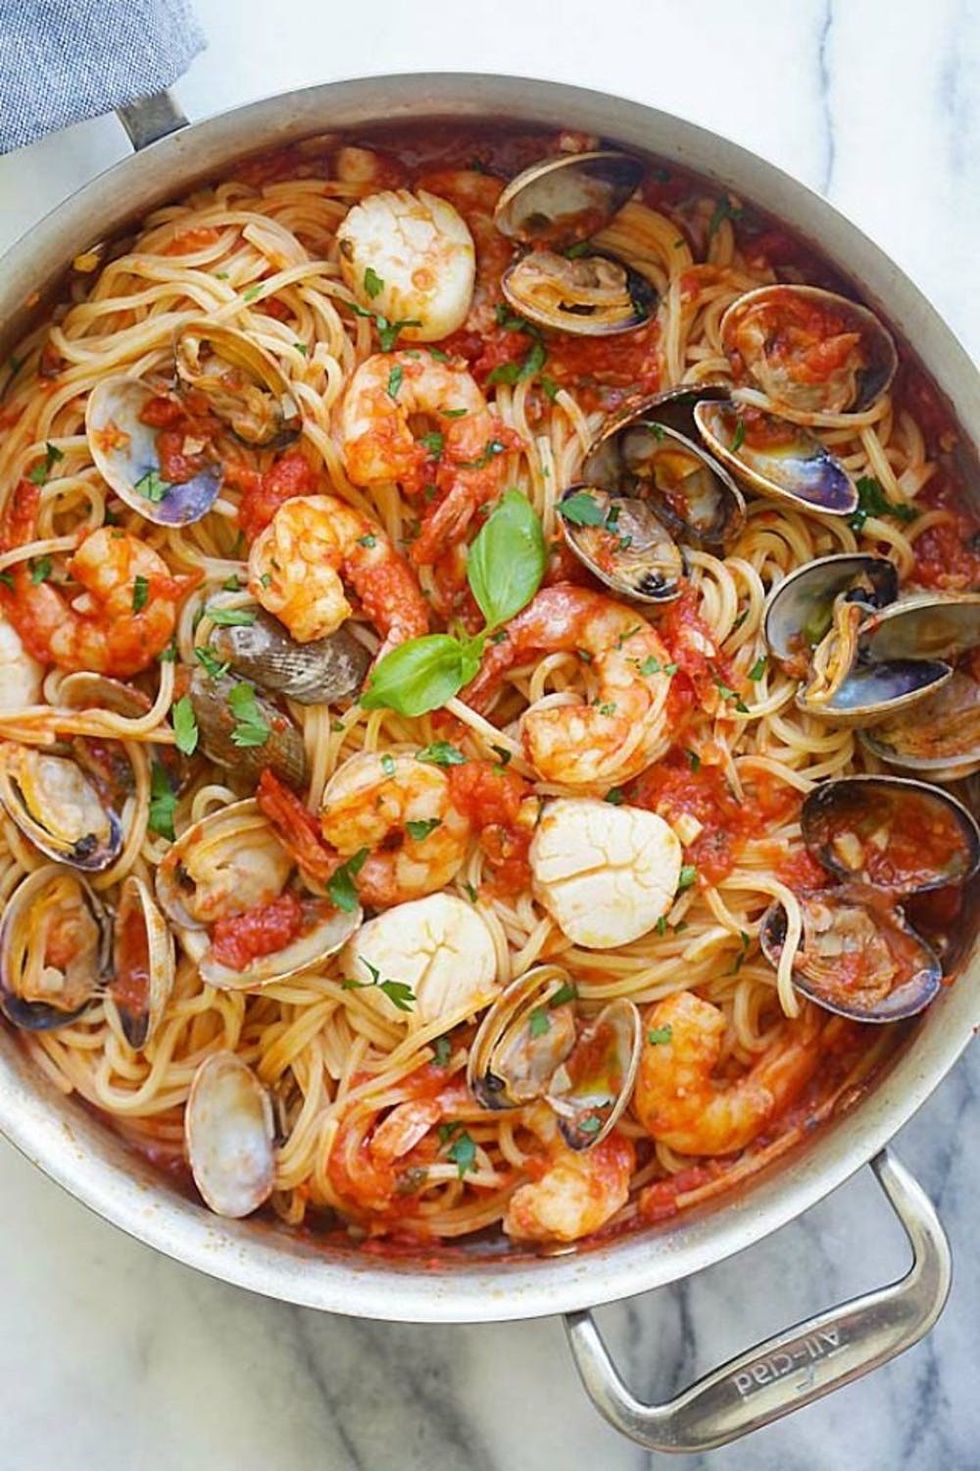 15 Romantically Simple Pasta Dinners That Scream “That’s Amore!” - Brit